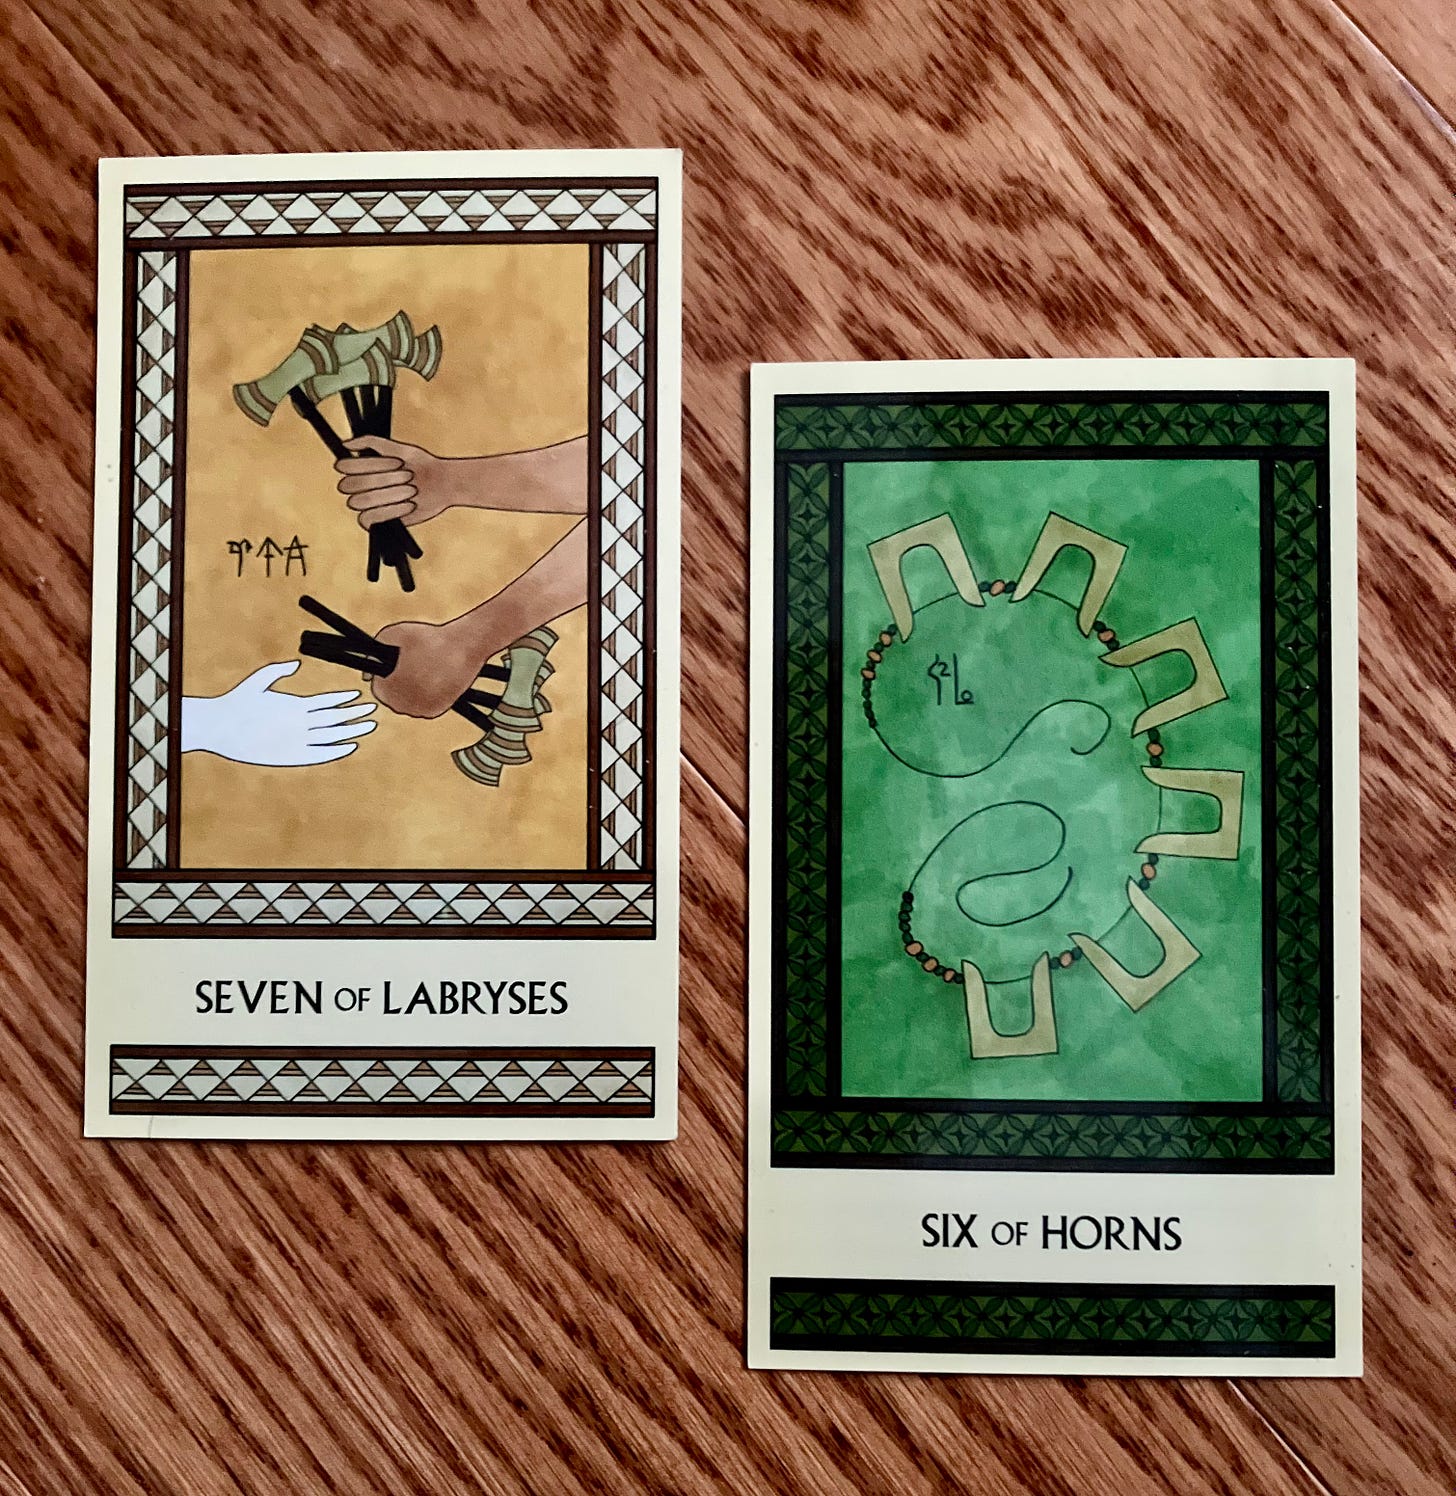 Two Minoan Tarot cards side by side on a wood background. The Seven of Labryses is in shades of gold and cream and shows one set of hands holding a bunch of labryses and handing some of them to another. The Six of Horns is in shades of green and shows a necklace made of six pairs of golden sacred horns.